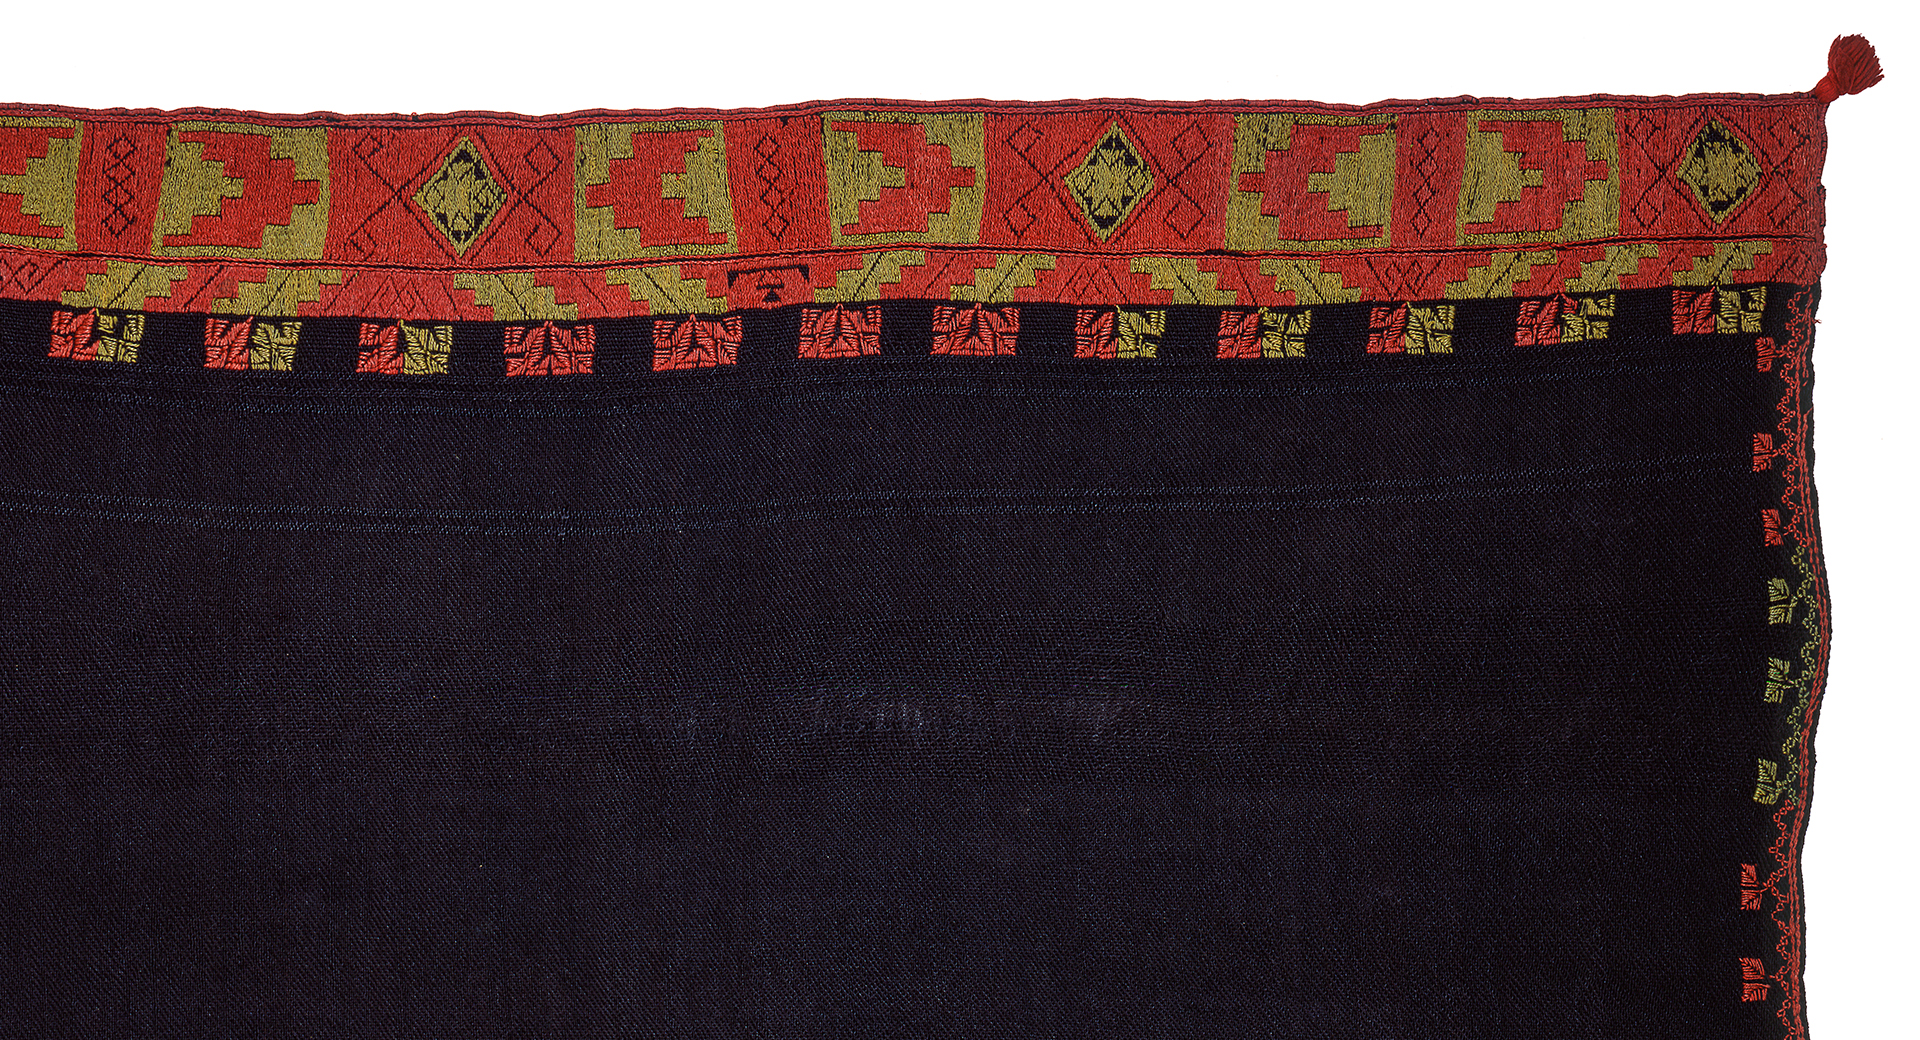 Detail of a black textile with a geometric orange and yellow design around the edge.